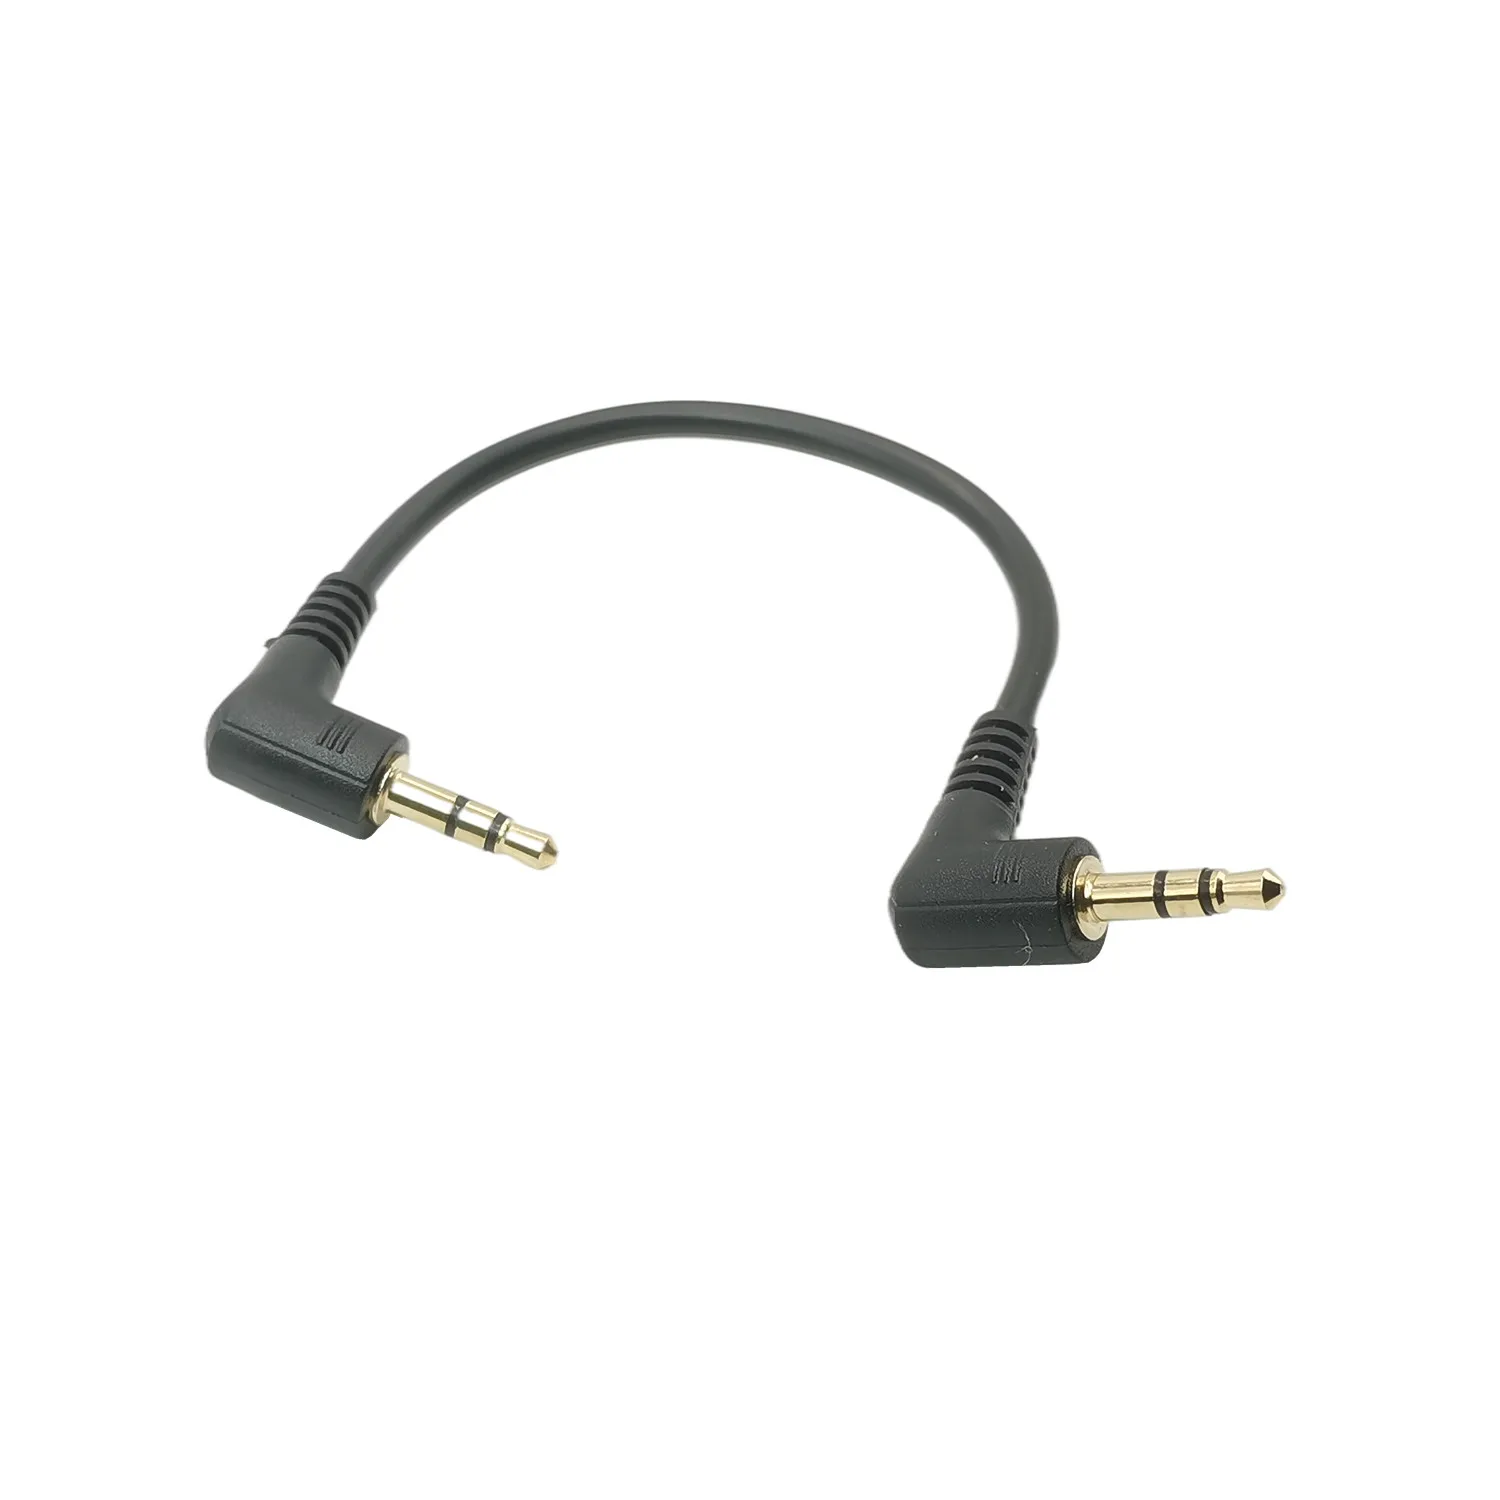 10cm 90 Degree Right Angle 3 pole 3.5mm Aux Audio Flat Cable Cord Male to Male for phone car aux Speaker